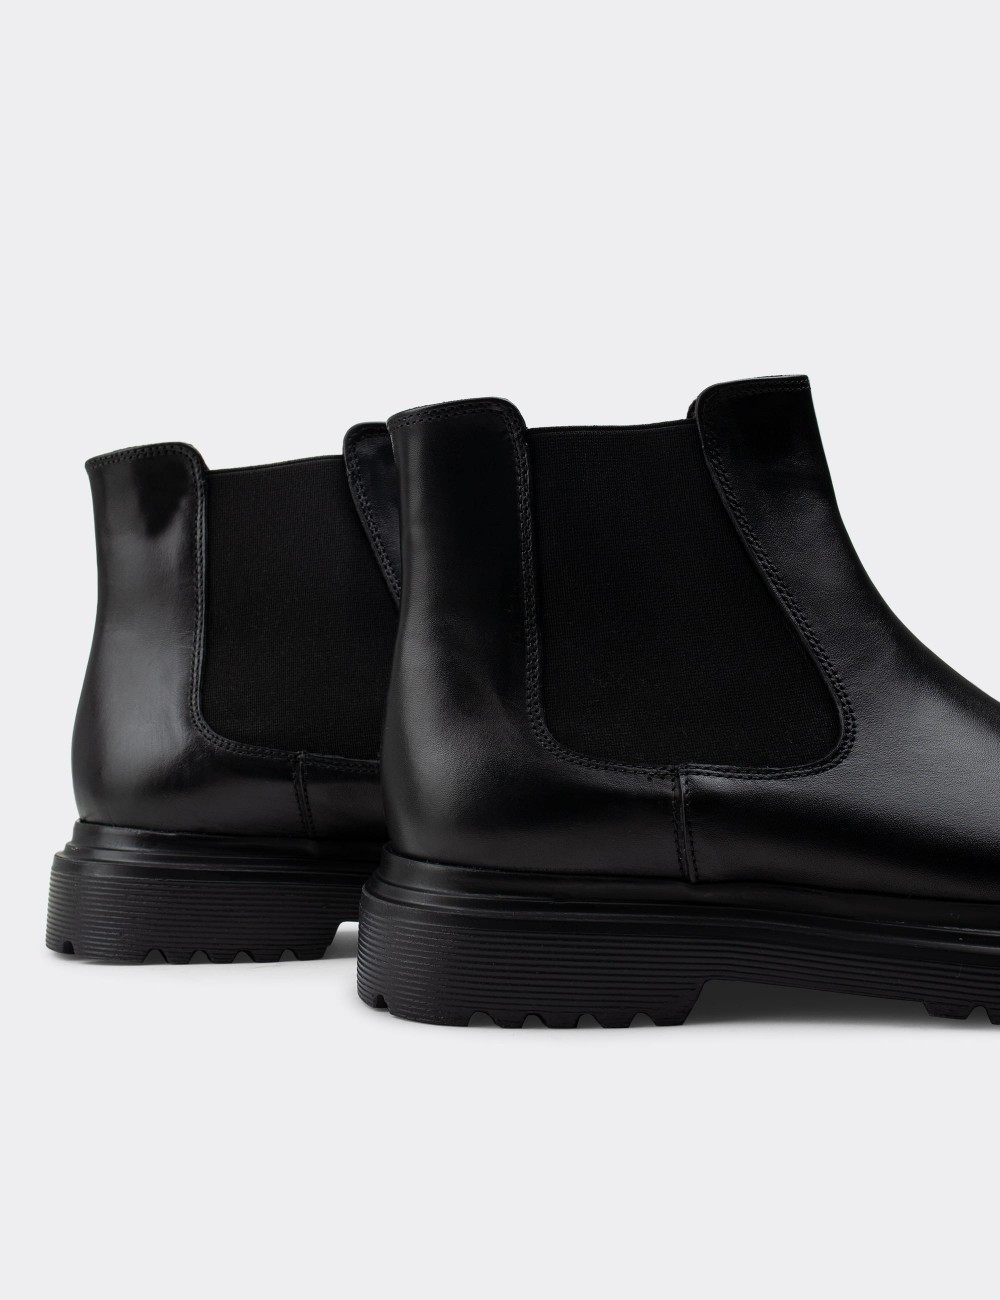 Black  Leather Chelsea Boots - 01849MSYHE01